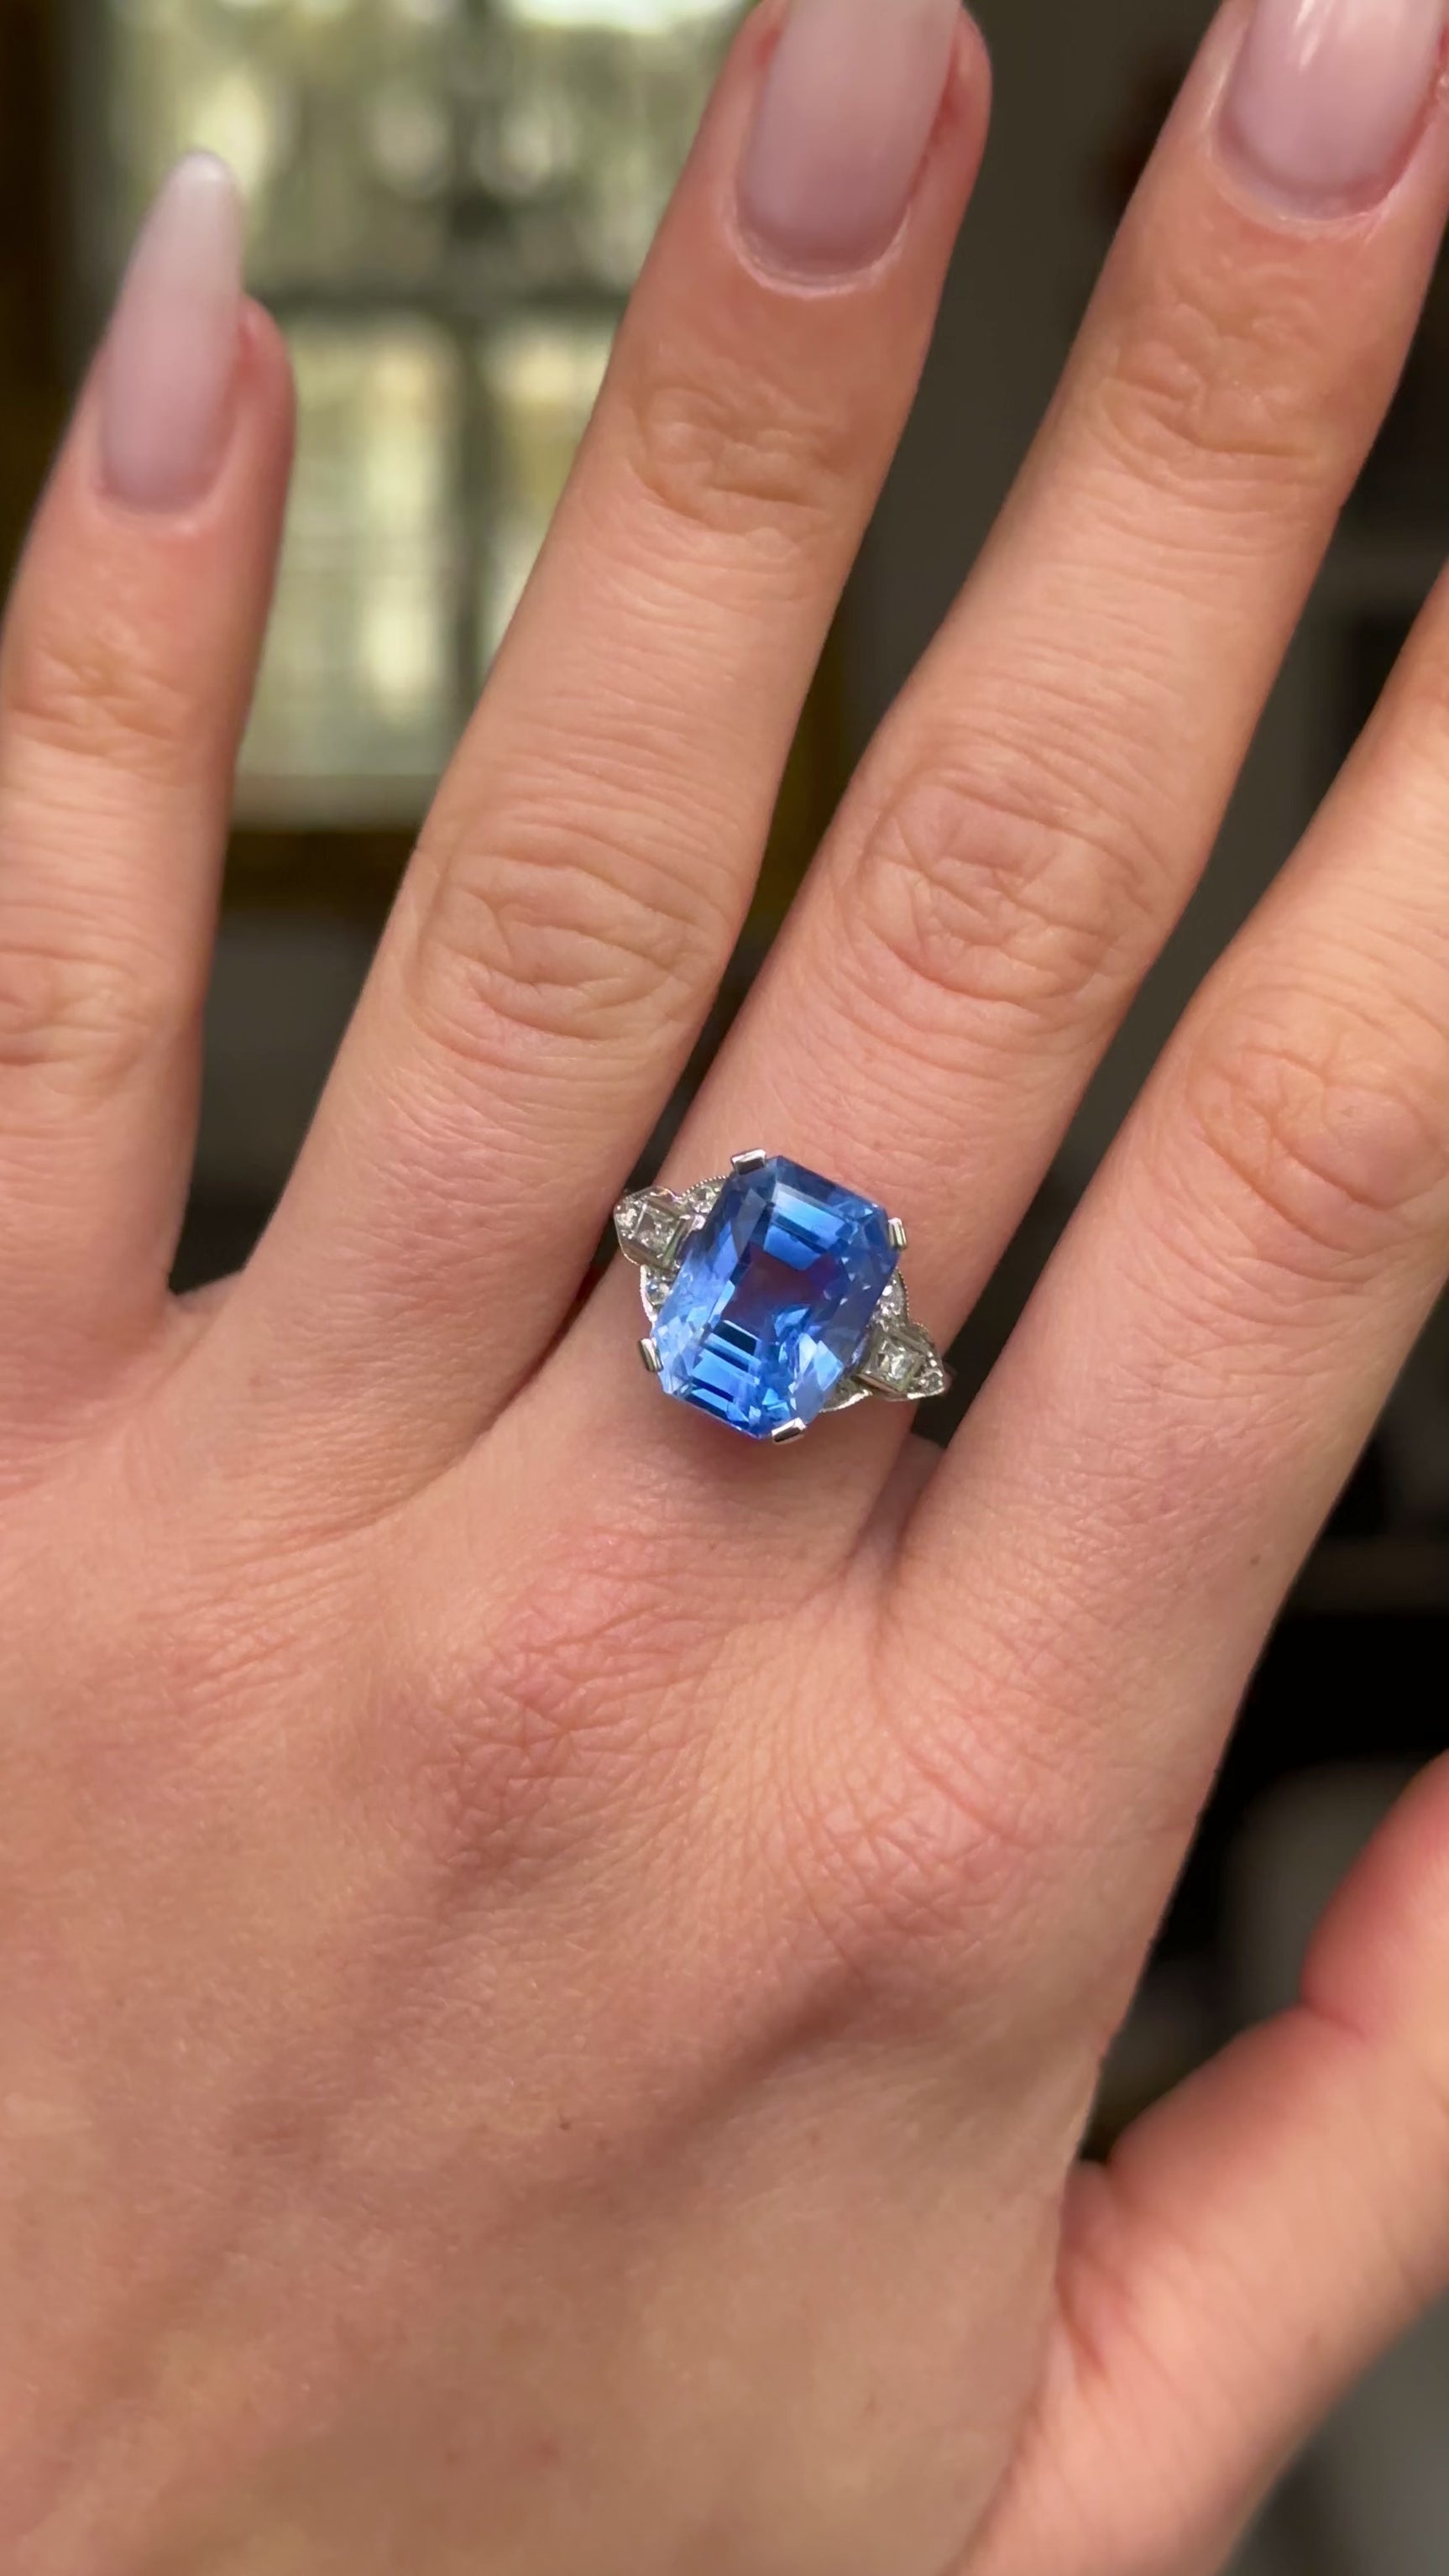 Art Deco sapphire and diamond ring worn on hand and moved around to give perspective.